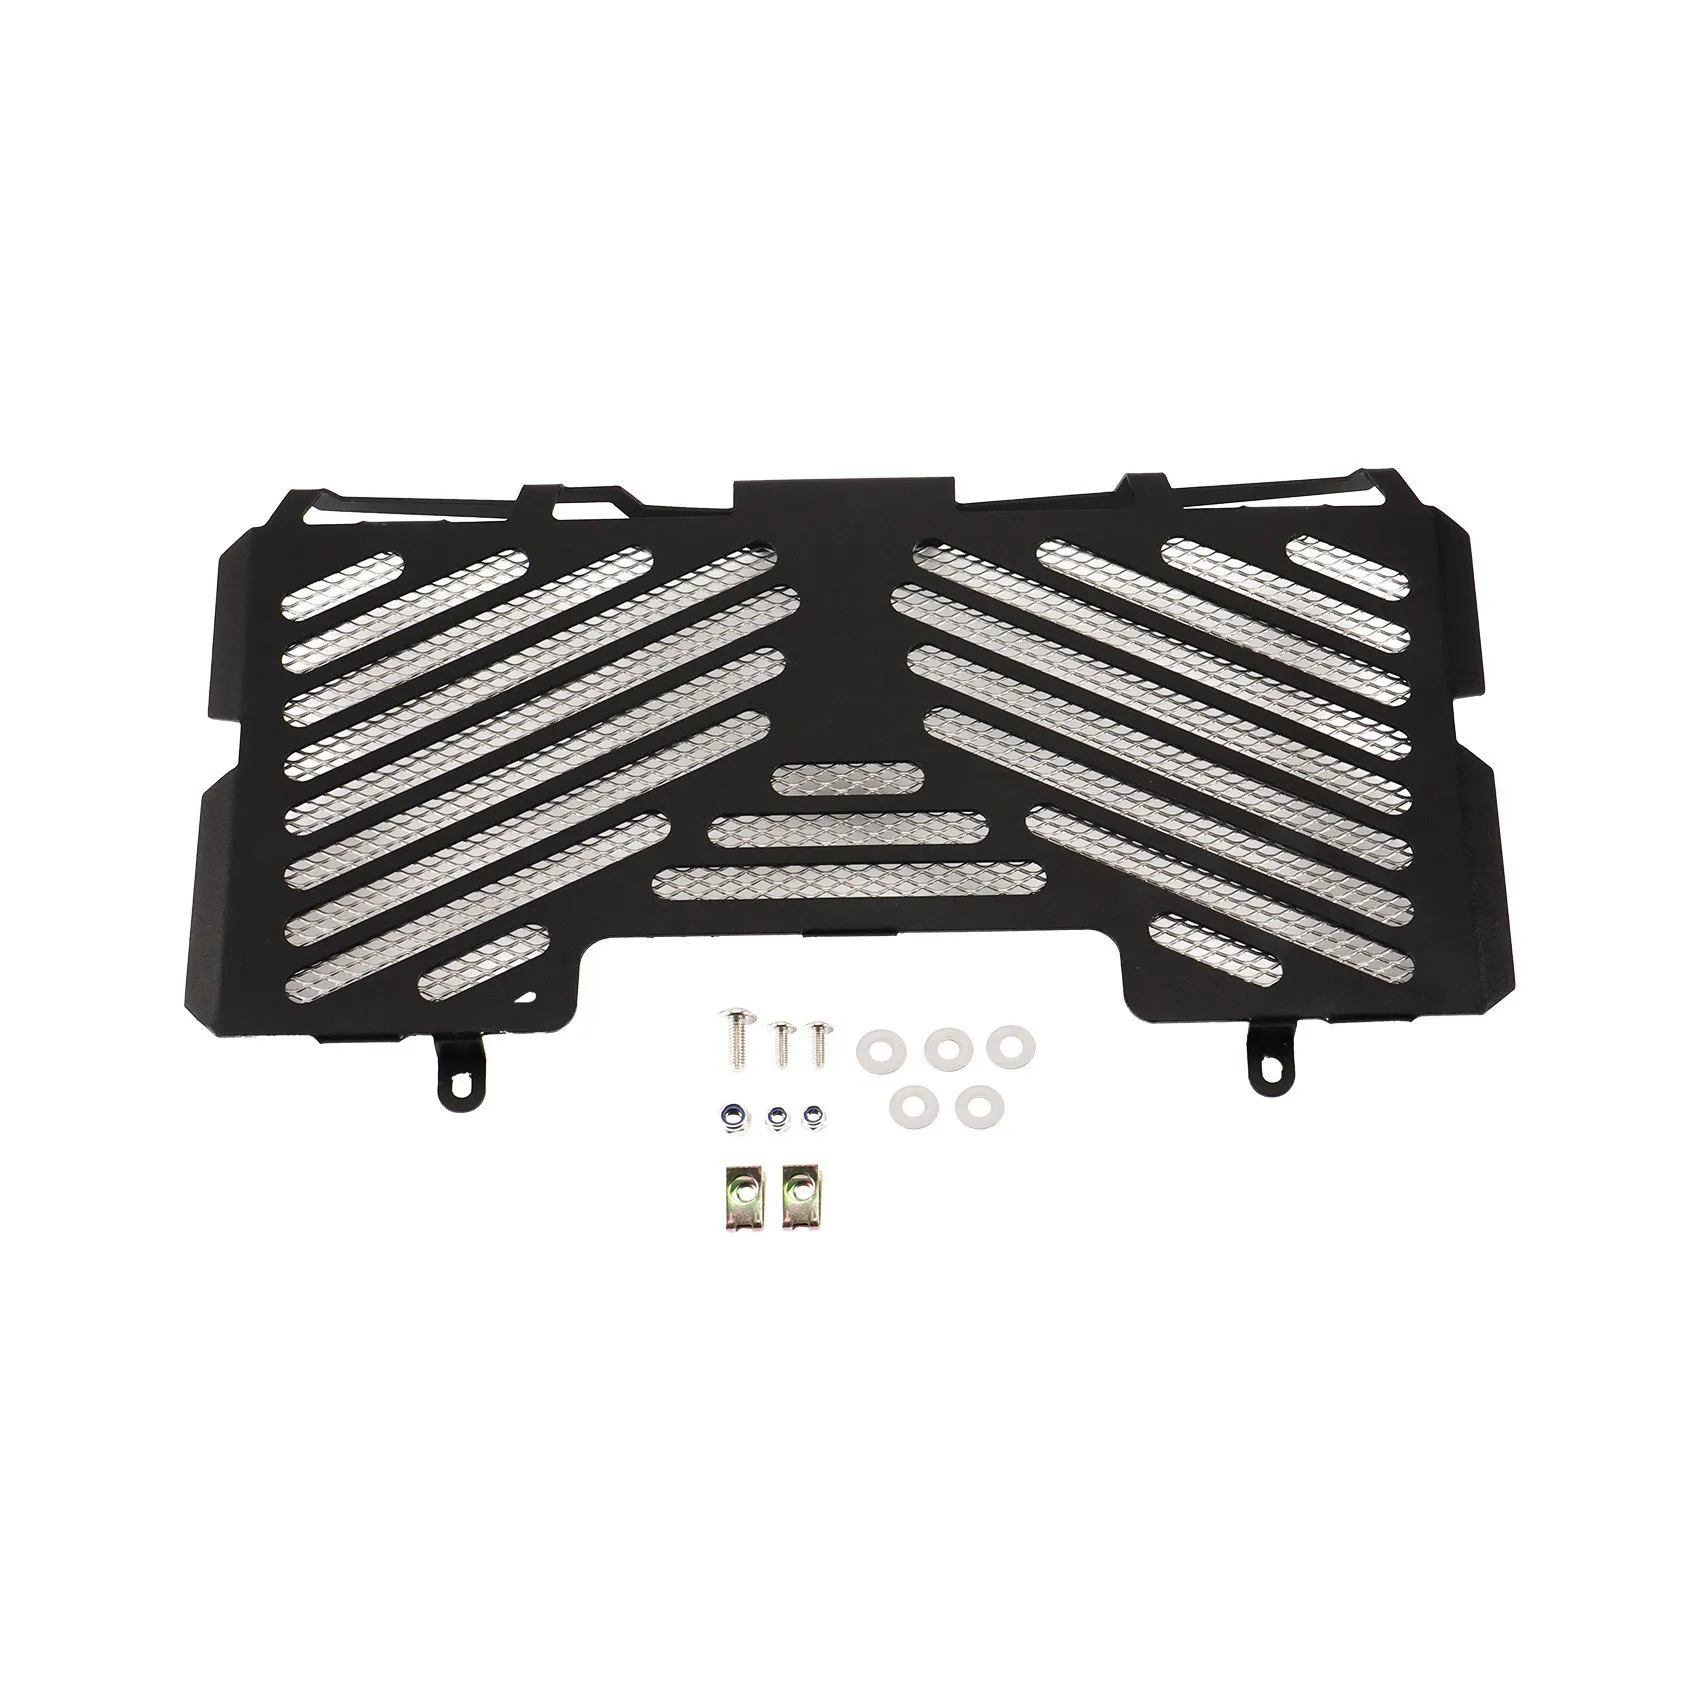 

Motorcycle Radiator Grille Grill Protective Guard Cover Perfect For-BMW F650GS F700GS F800R F800S(Black)